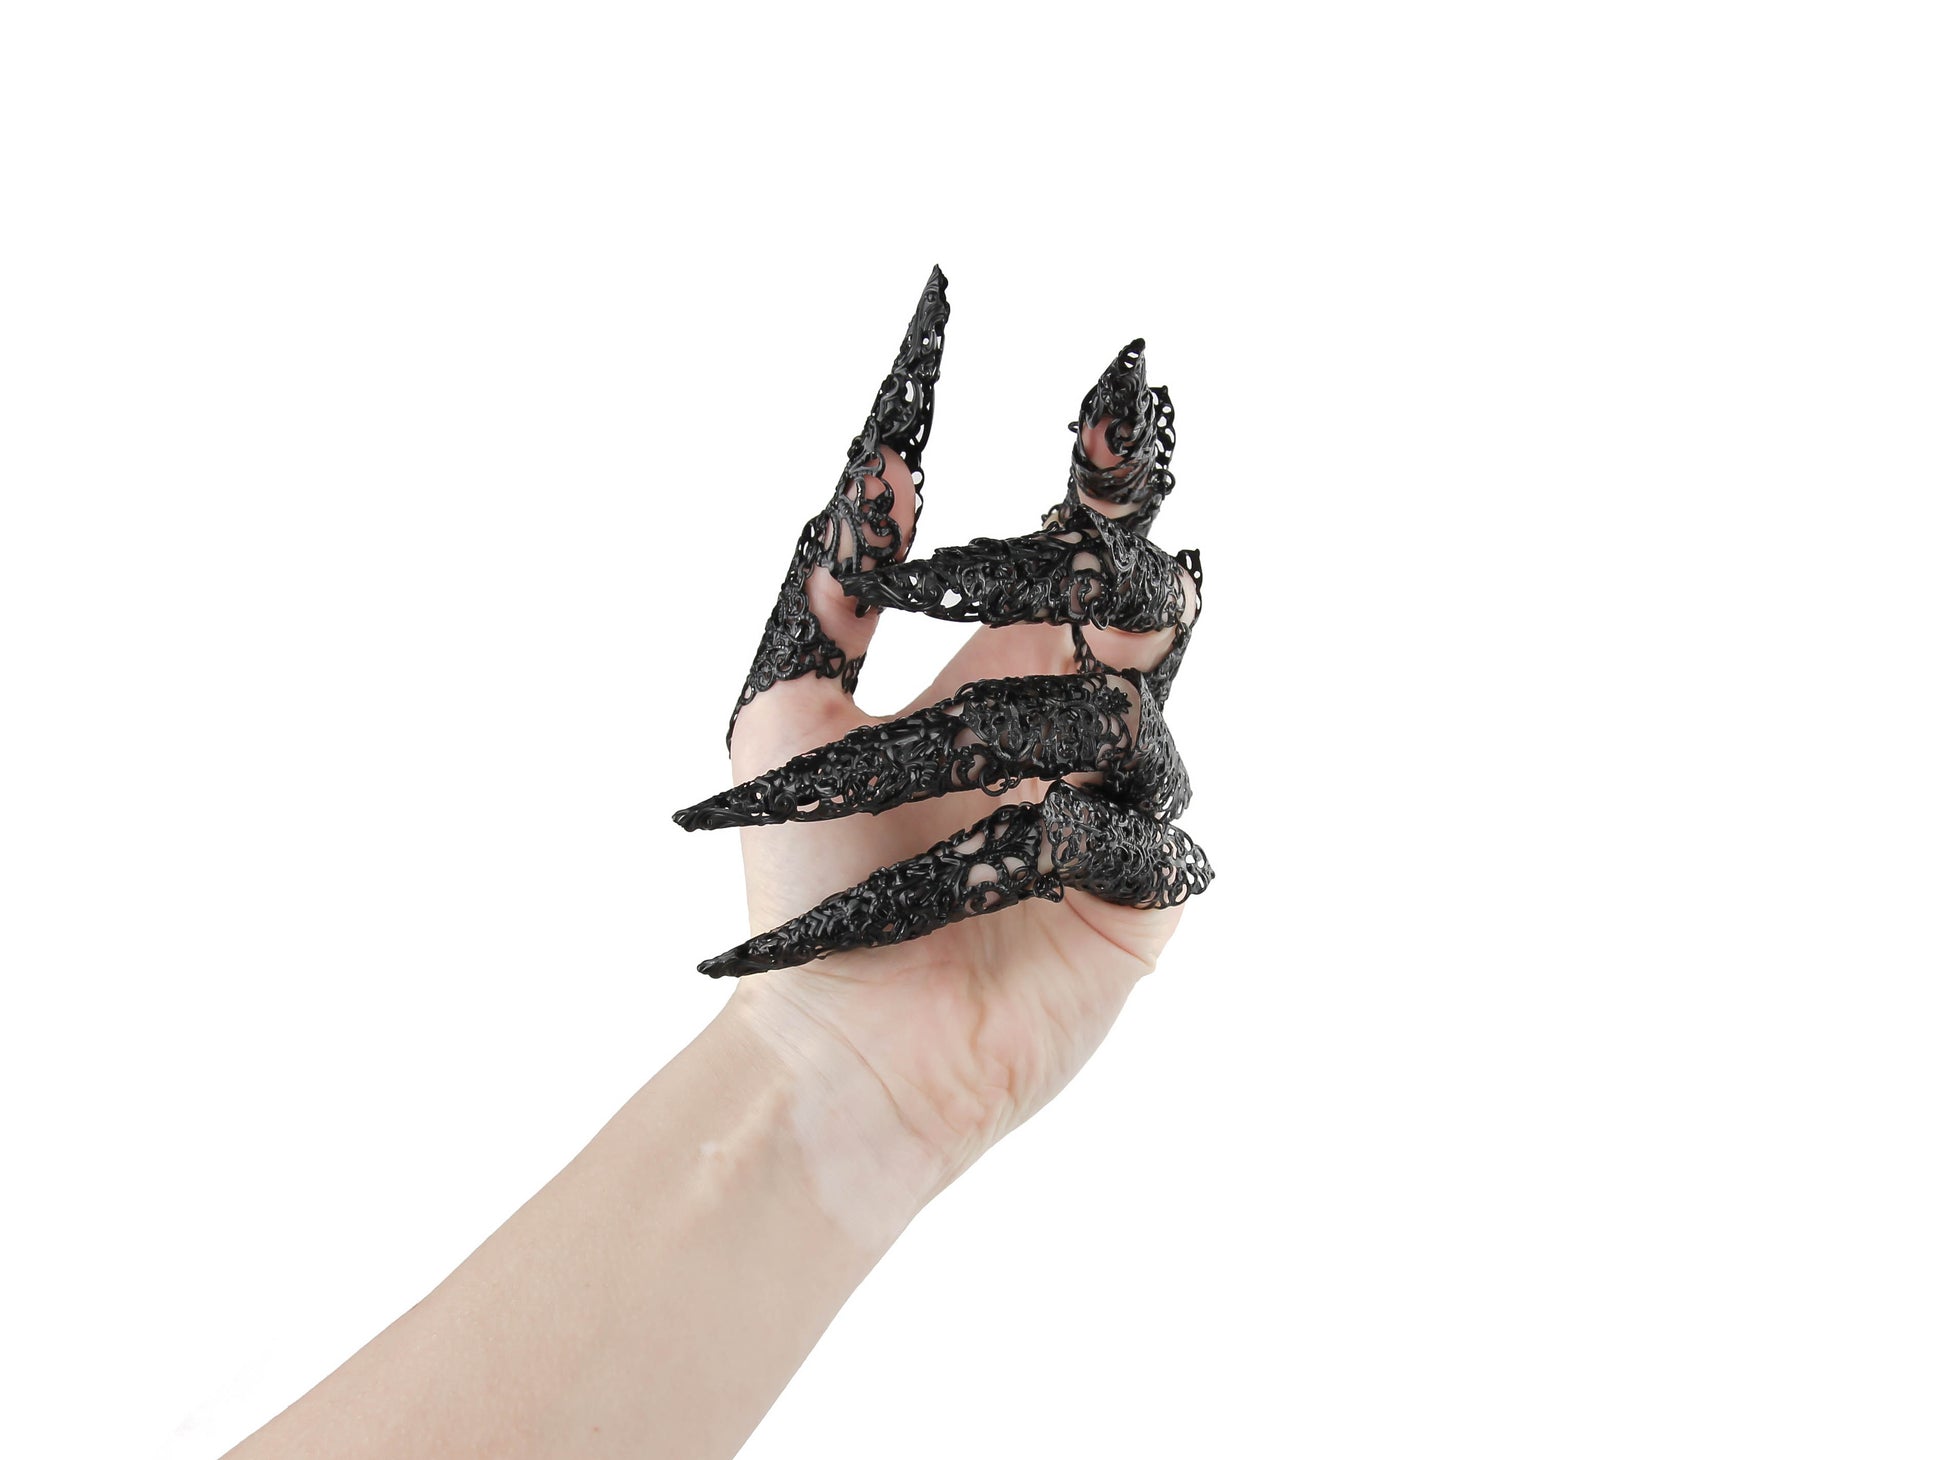 A hand is adorned with a full set of intricate, silver full-finger black claw rings extending into long nail claws, encapsulating a neo-goth aesthetic. These bold, dark-avantgarde pieces from Myril Jewels offer a unique Halloween or everyday wear option for gothic and alternative style enthusiasts seeking festival or rave party jewelry.